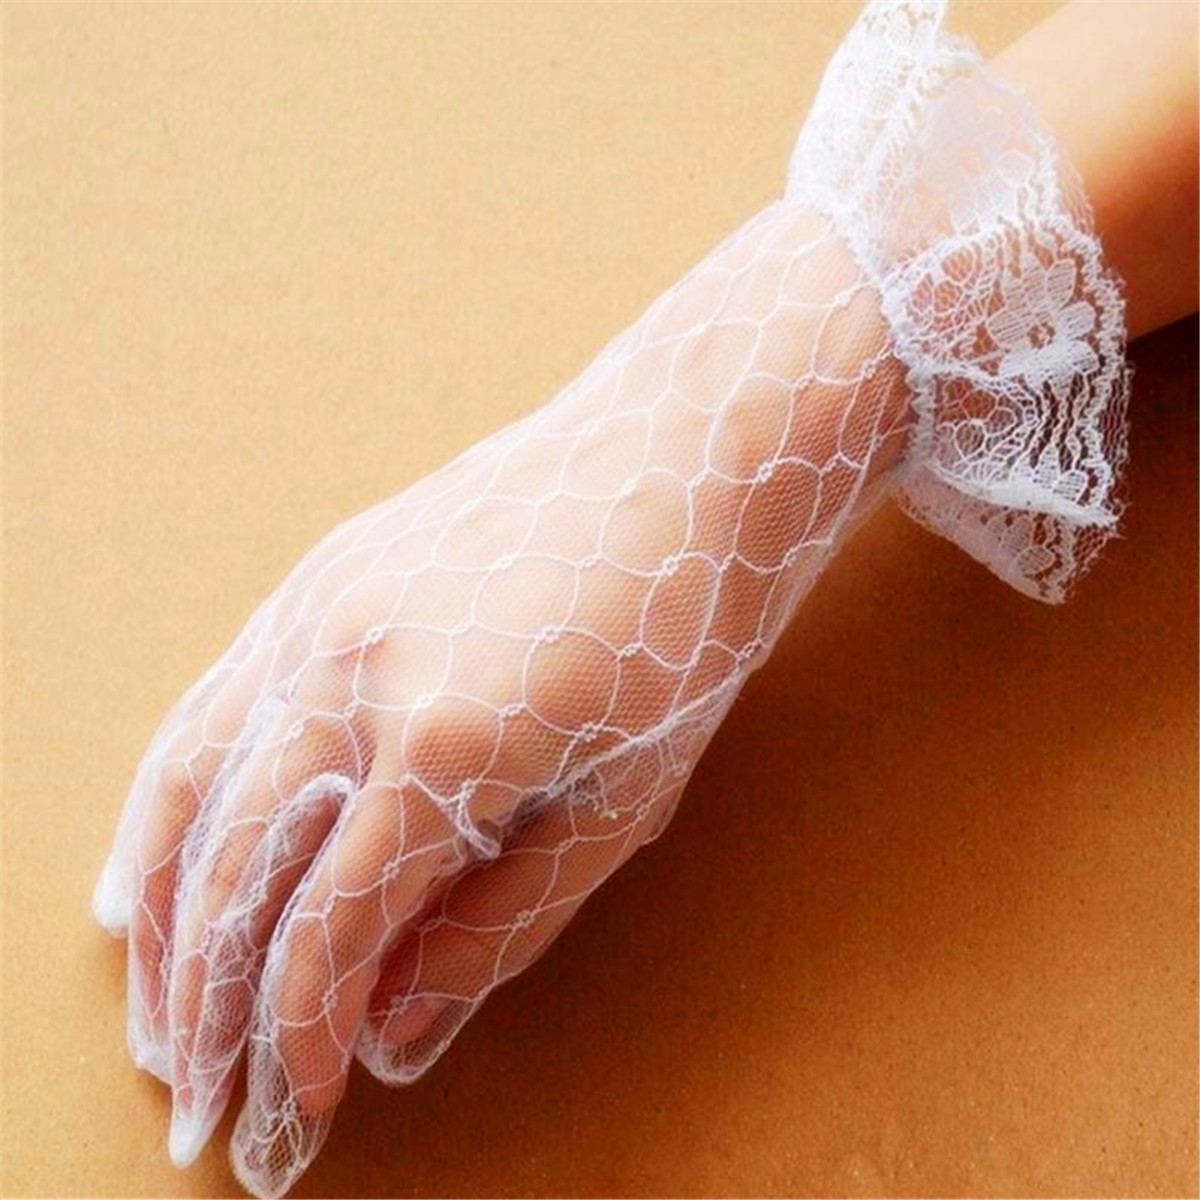 Women-Ladies-Sexy-Finger-Lace-Transparent-Wedding-Bridal-Cocktail-Evening-Prom-Short-Gloves-998605